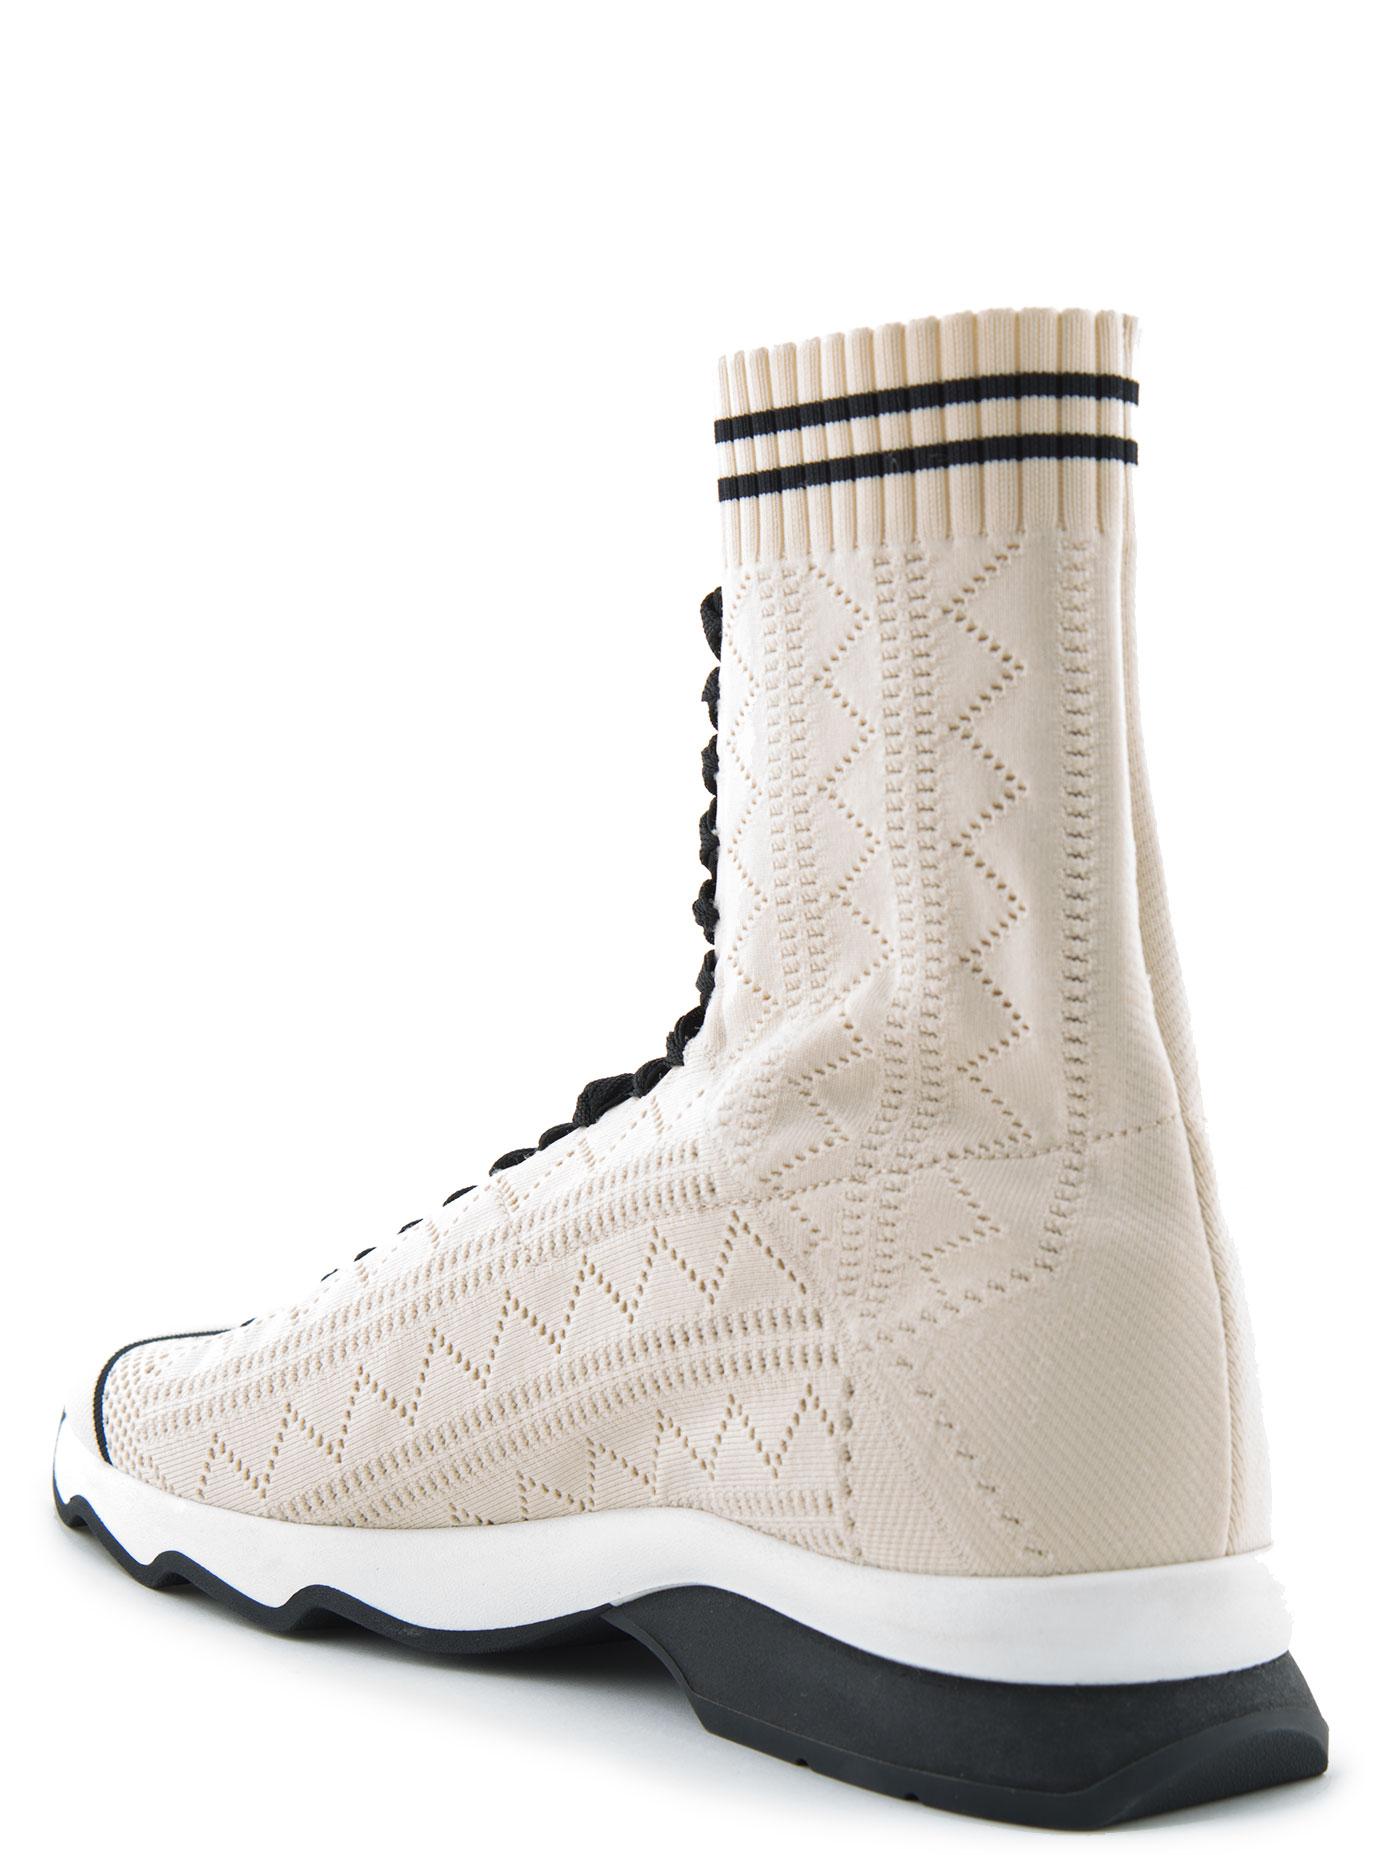 Lyst - Fendi Knitted Sock Sneakers in Natural for Men